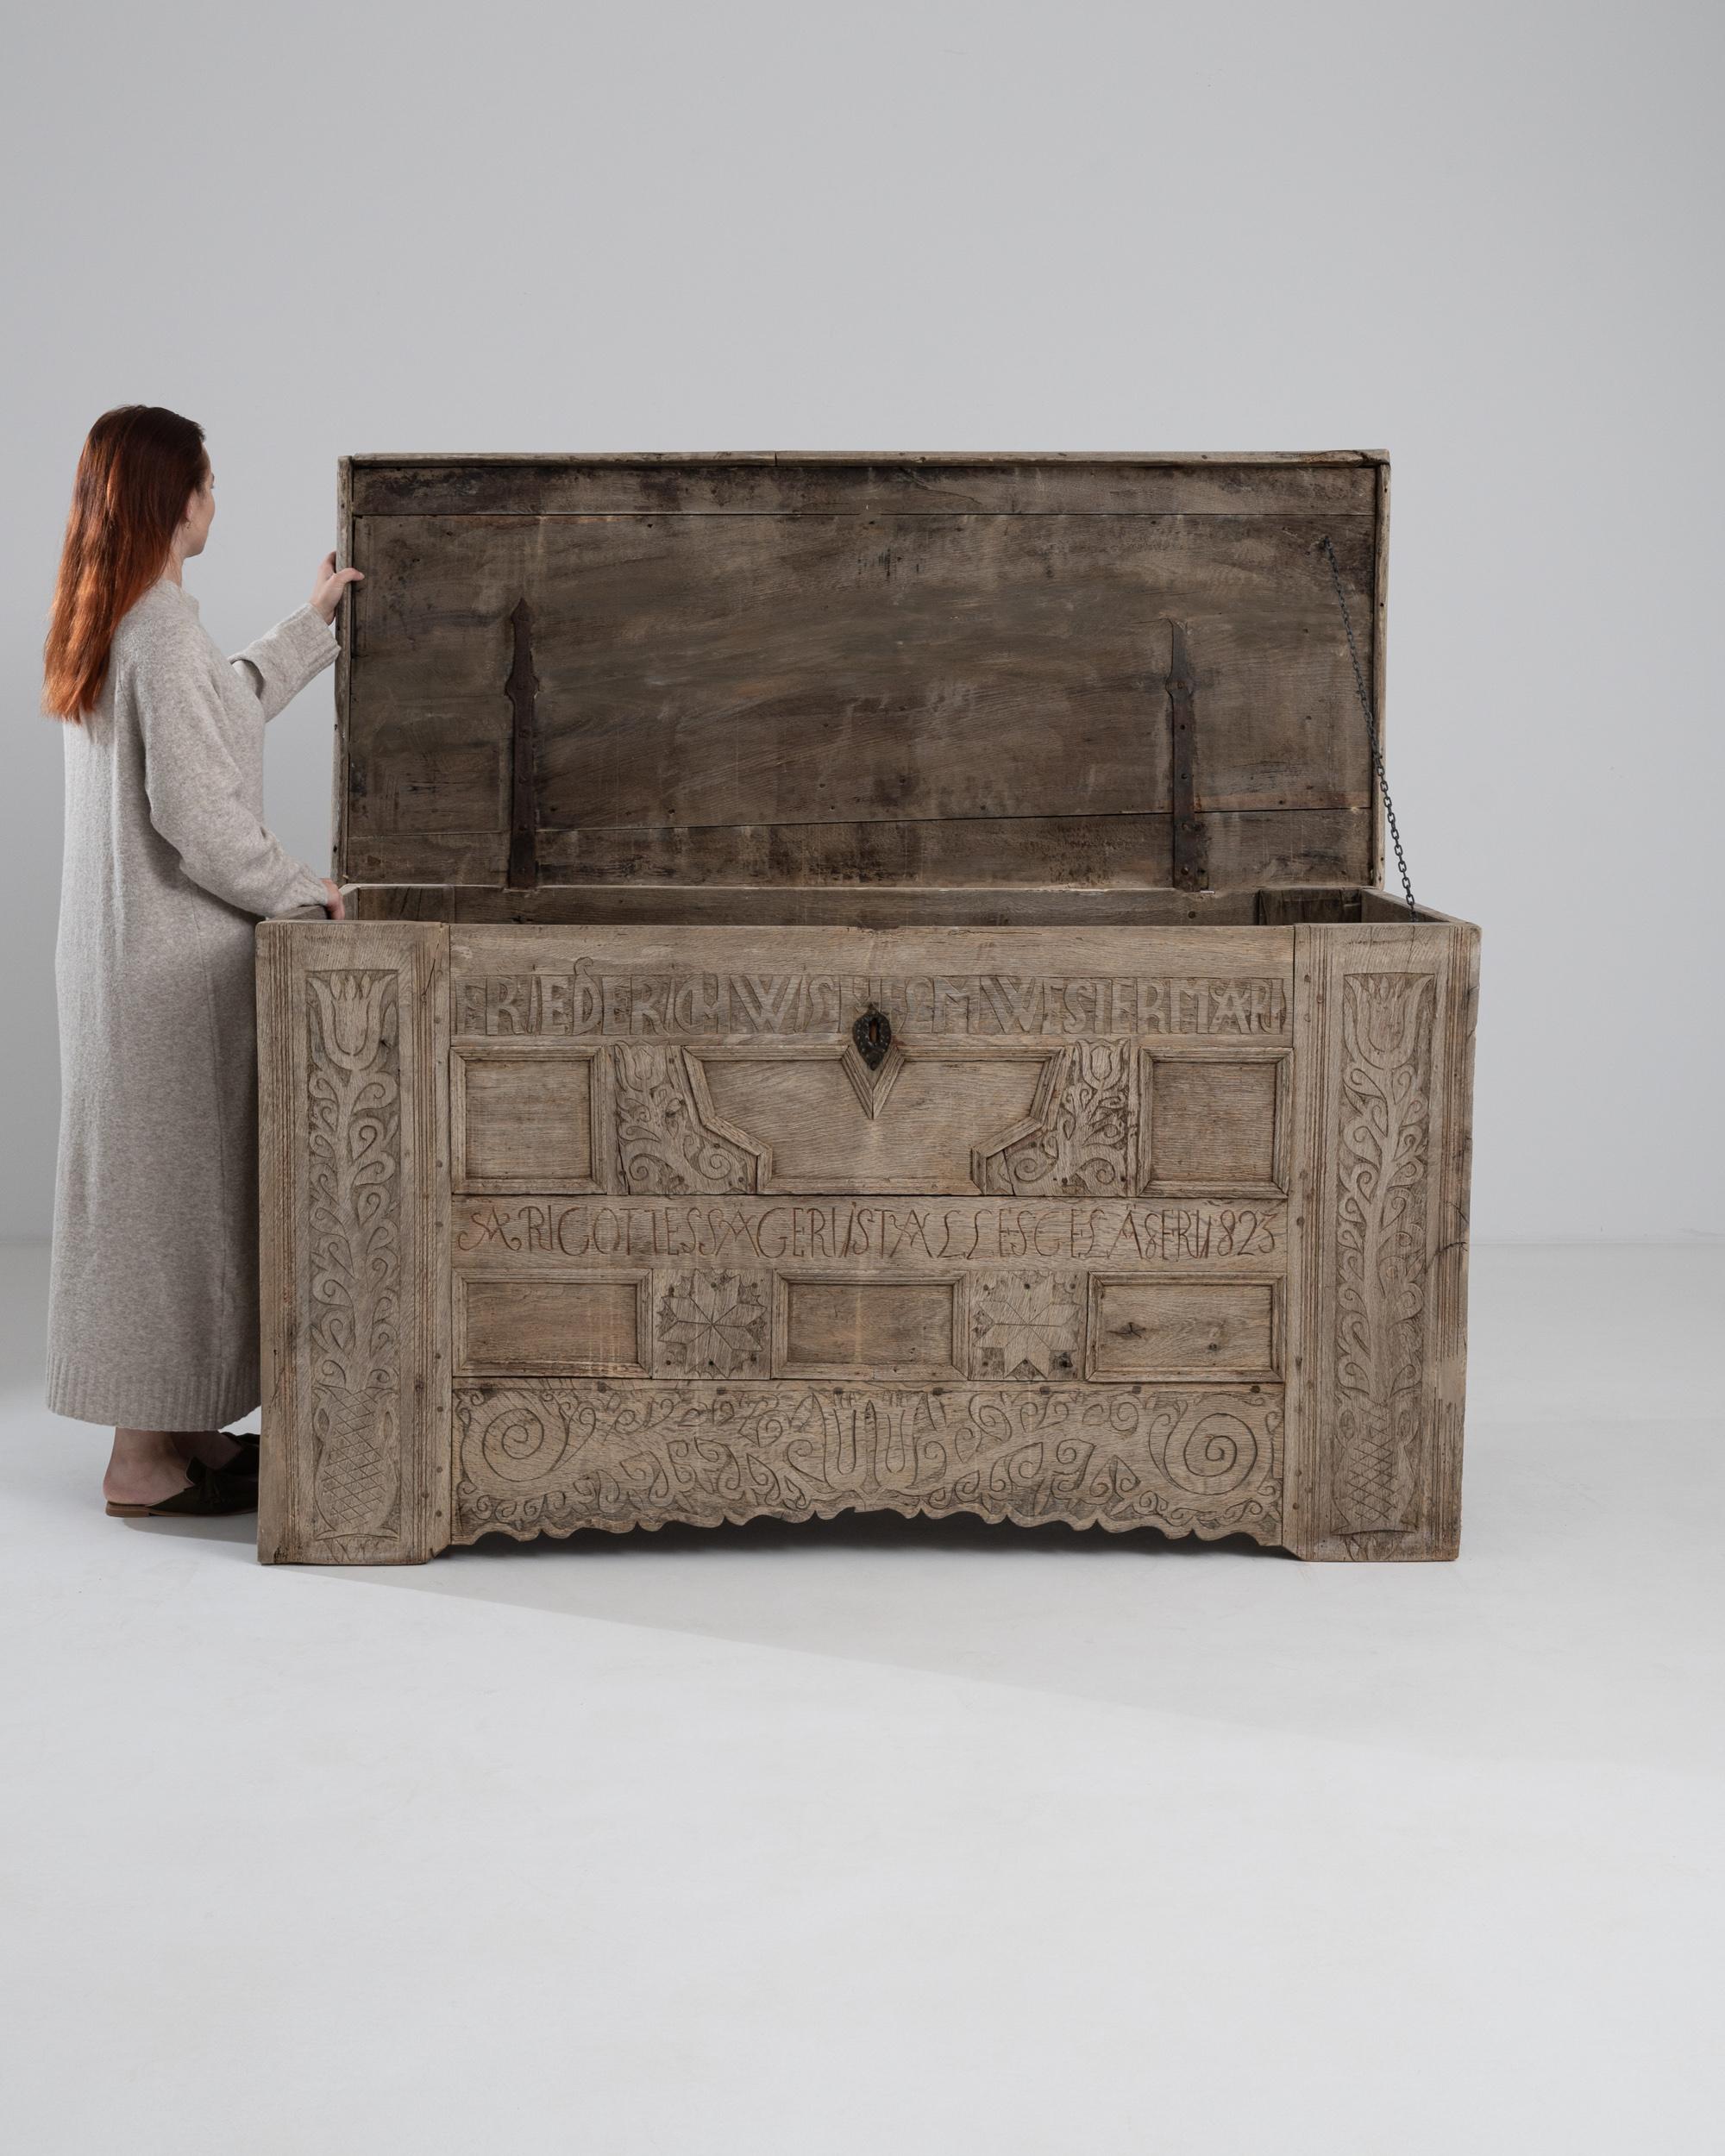 A wooden trunk from Germany, circa 1823. This enormous trunk is scrupulously carved from head to toe with a horror vacuii sensibility. Carved with the former owner’s name, the lettering as well as star and floral motifs emit both a majesty and a